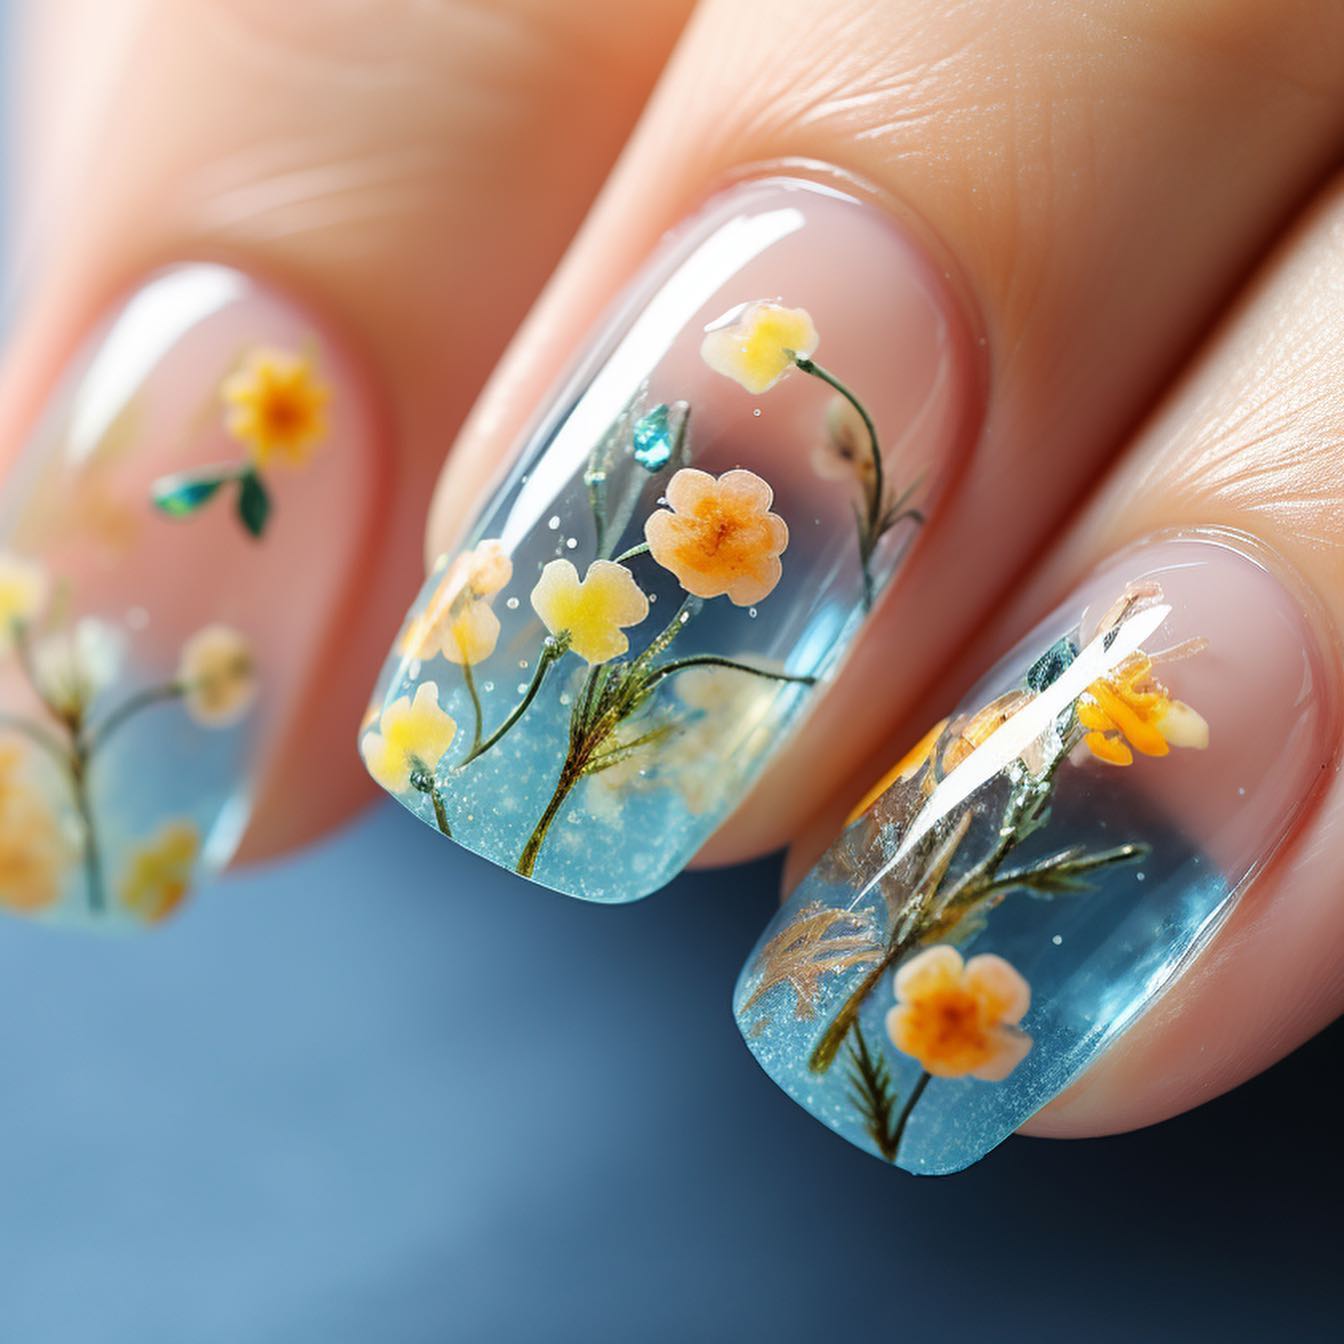 100+ Trendy And Cute Fall Nail Designs To Inspire You This Autumn In 2023 images 41